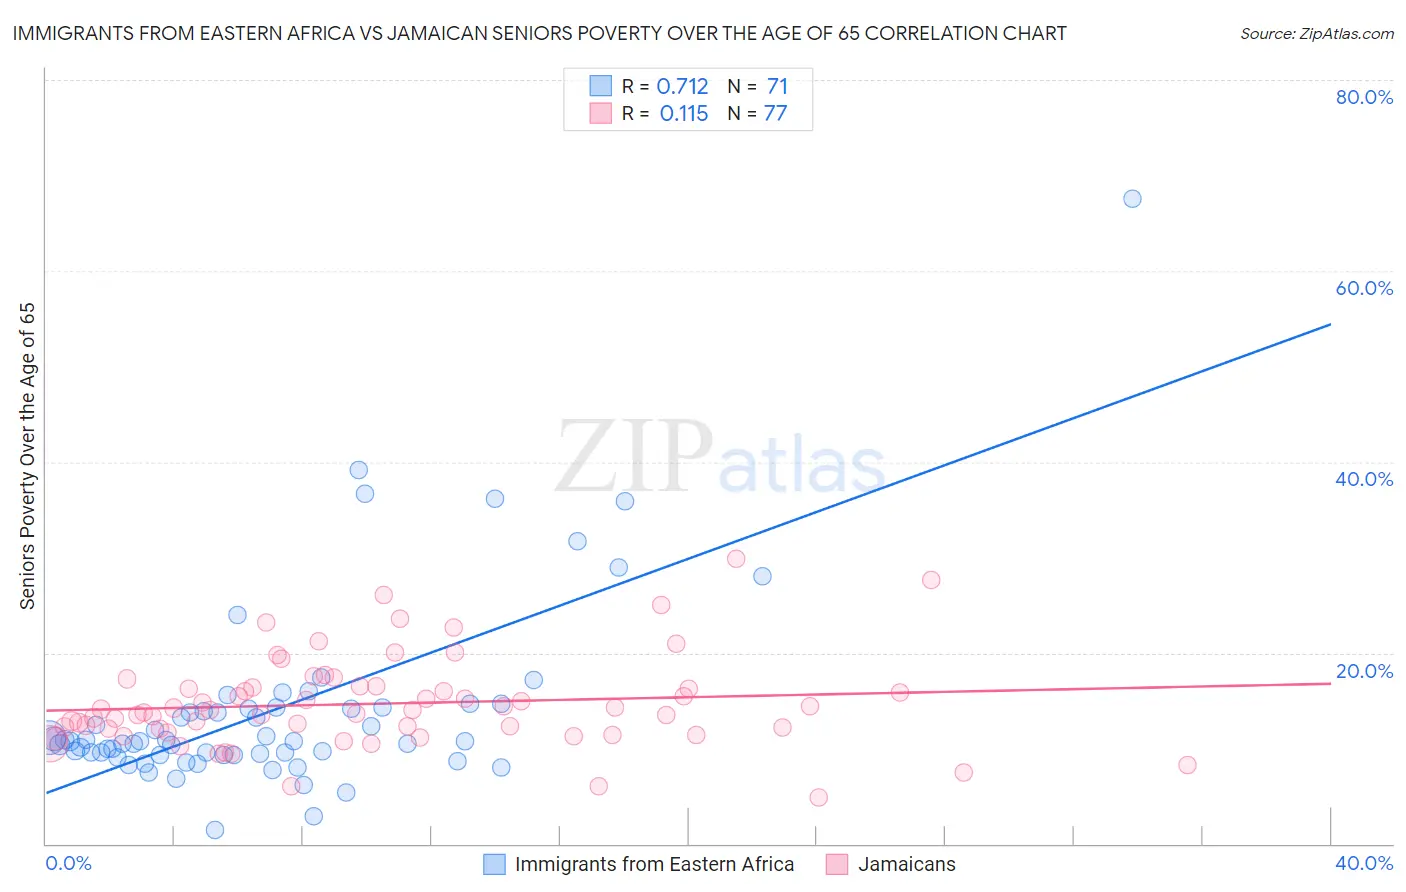 Immigrants from Eastern Africa vs Jamaican Seniors Poverty Over the Age of 65